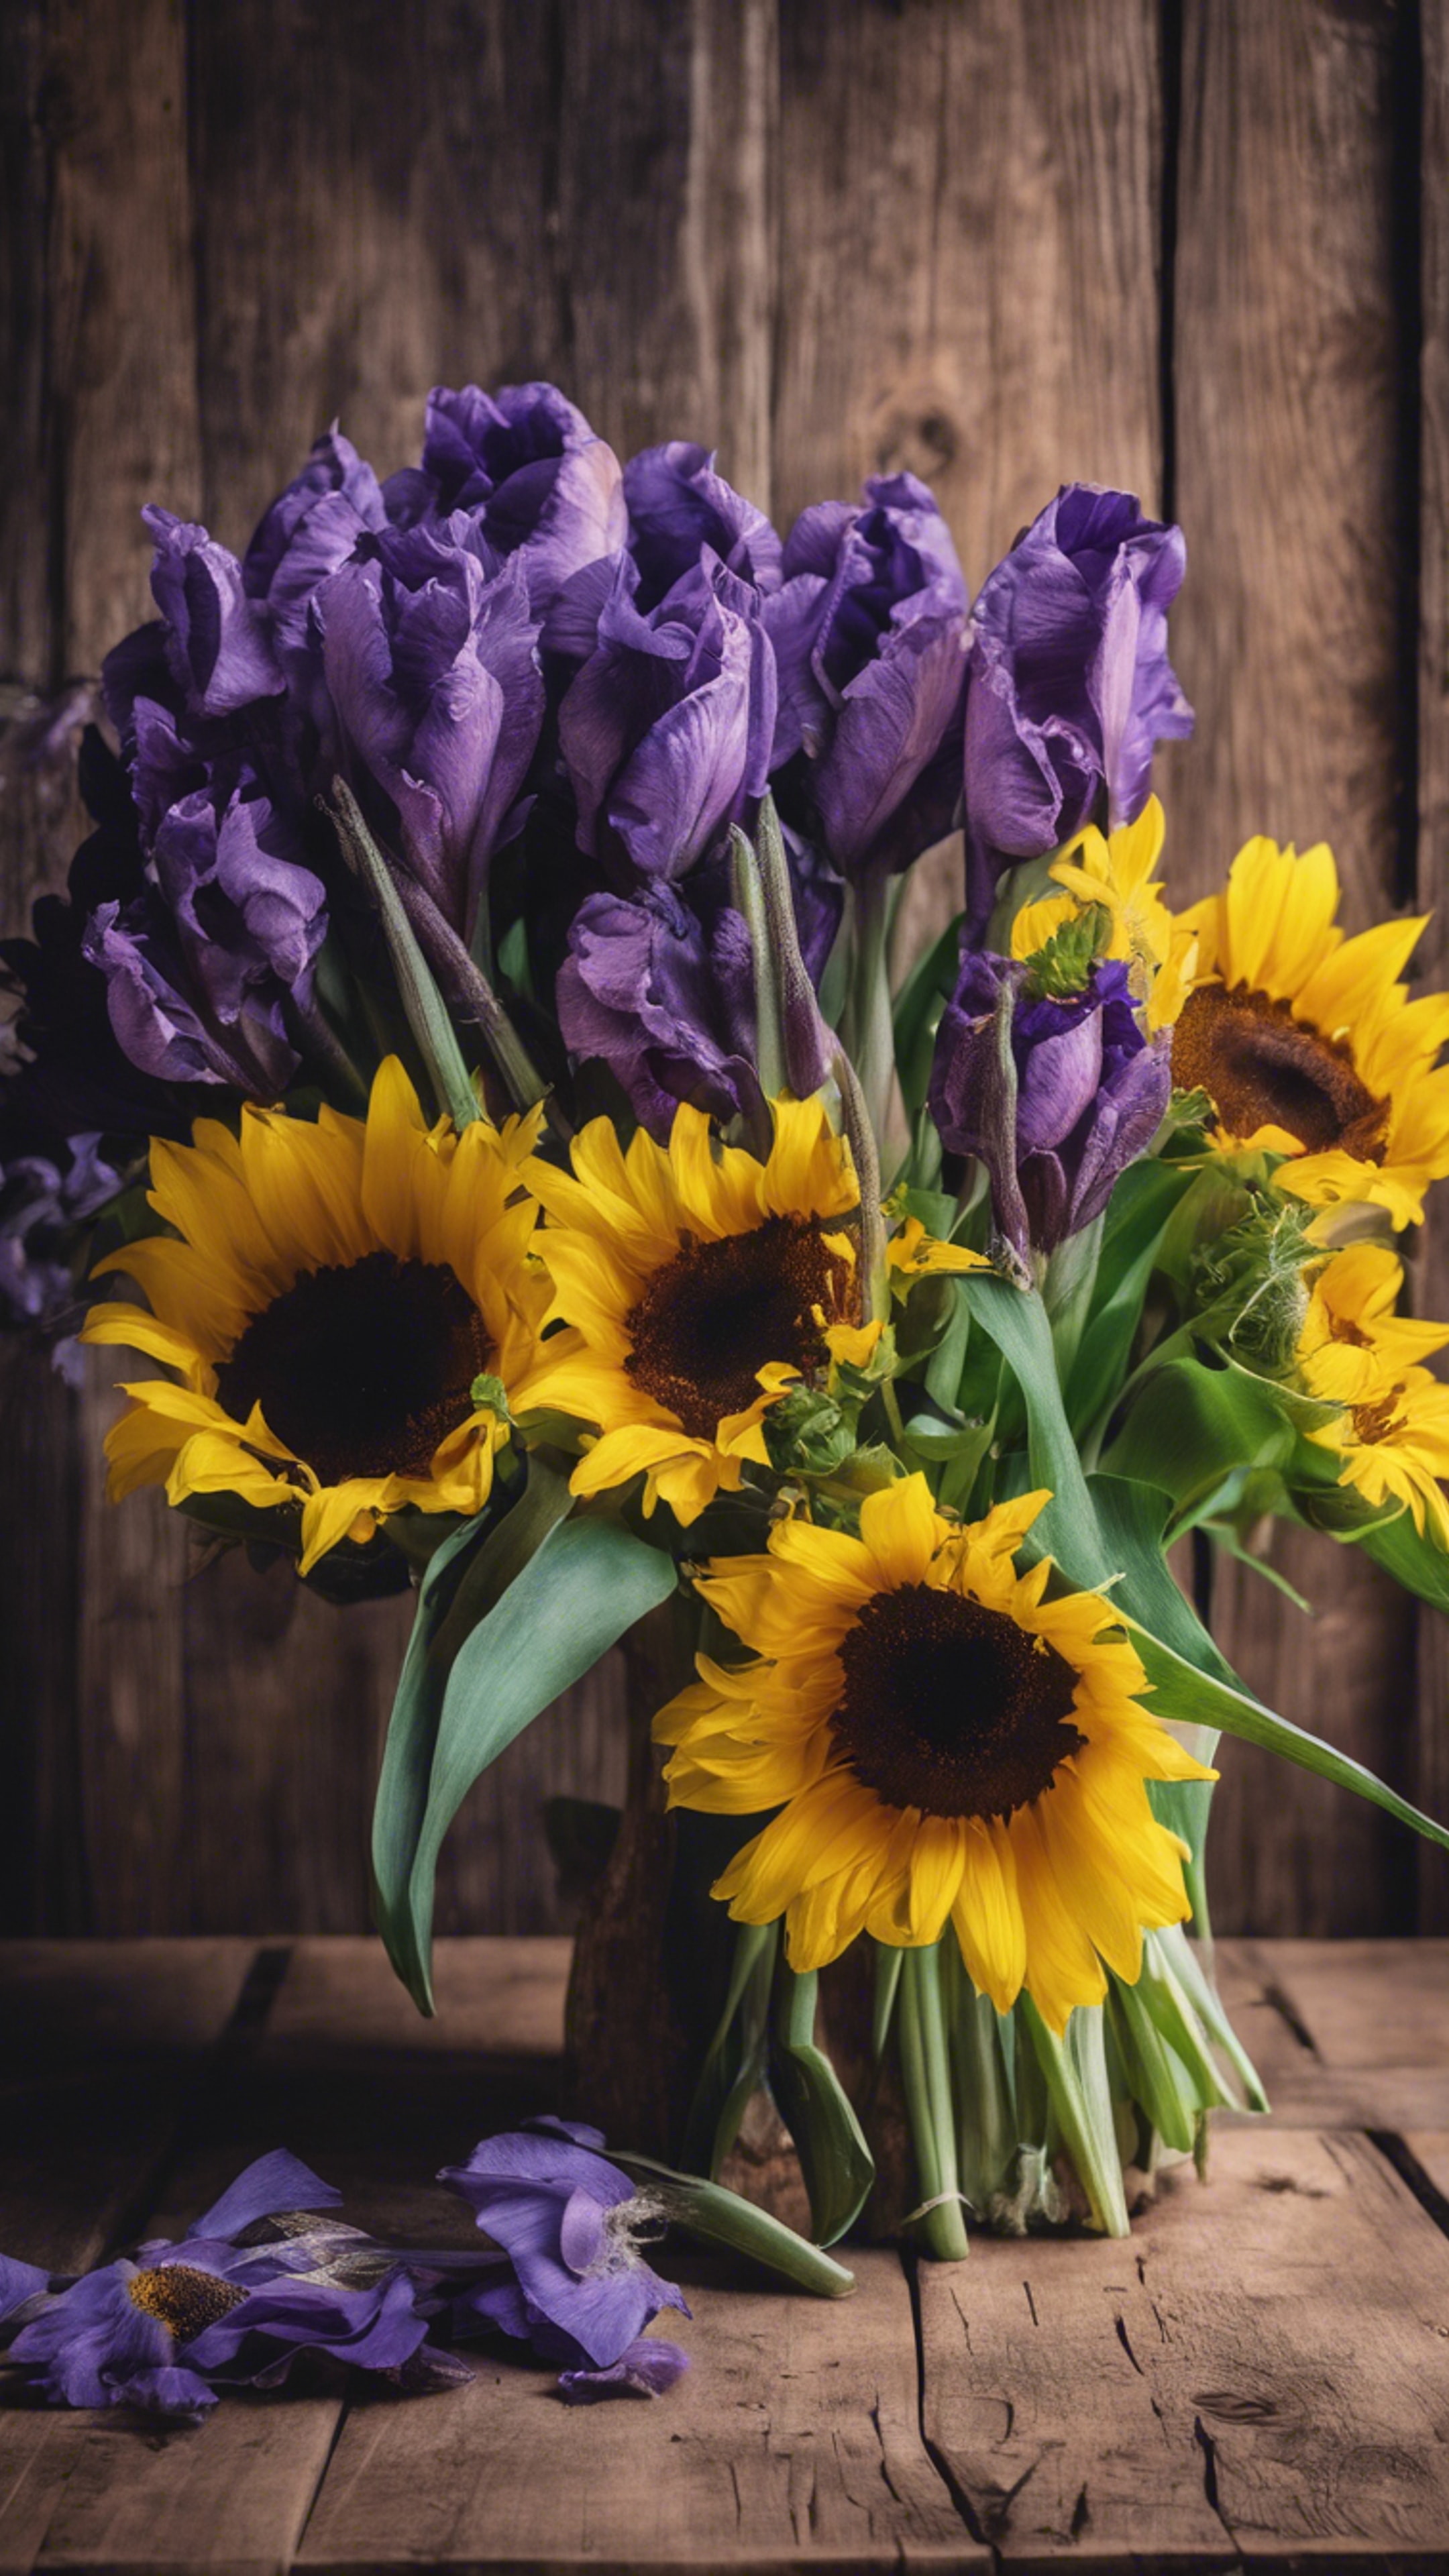 A bouquet of violet irises and bright yellow sunflowers sitting on a rustic wooden table. Taustakuva[036542cc0bff4a9eafa2]